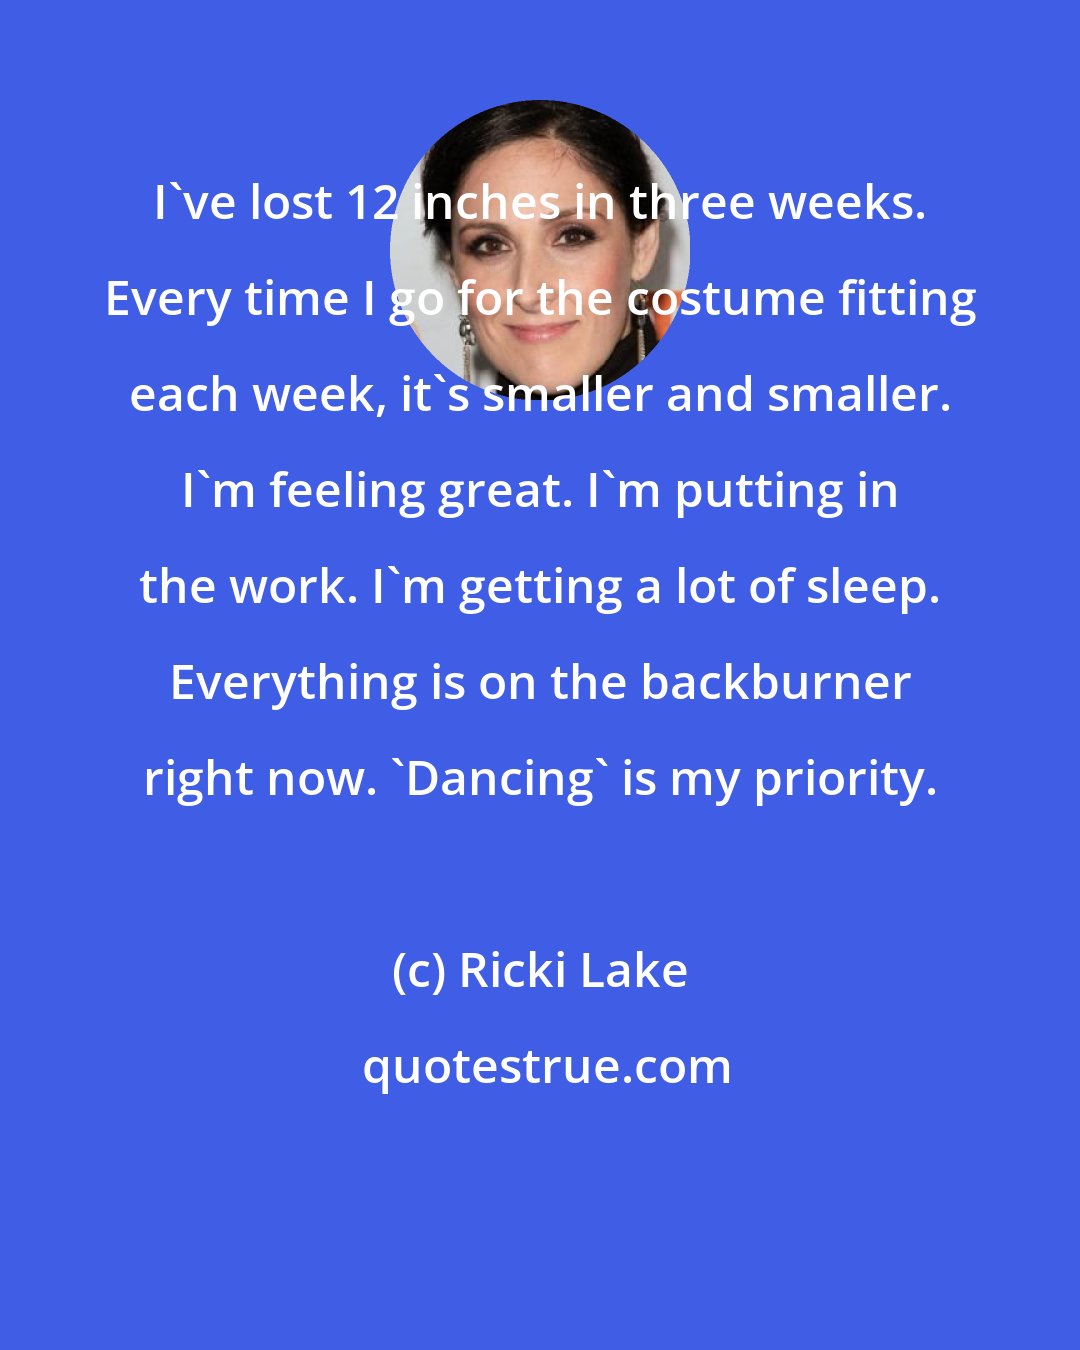 Ricki Lake: I've lost 12 inches in three weeks. Every time I go for the costume fitting each week, it's smaller and smaller. I'm feeling great. I'm putting in the work. I'm getting a lot of sleep. Everything is on the backburner right now. 'Dancing' is my priority.